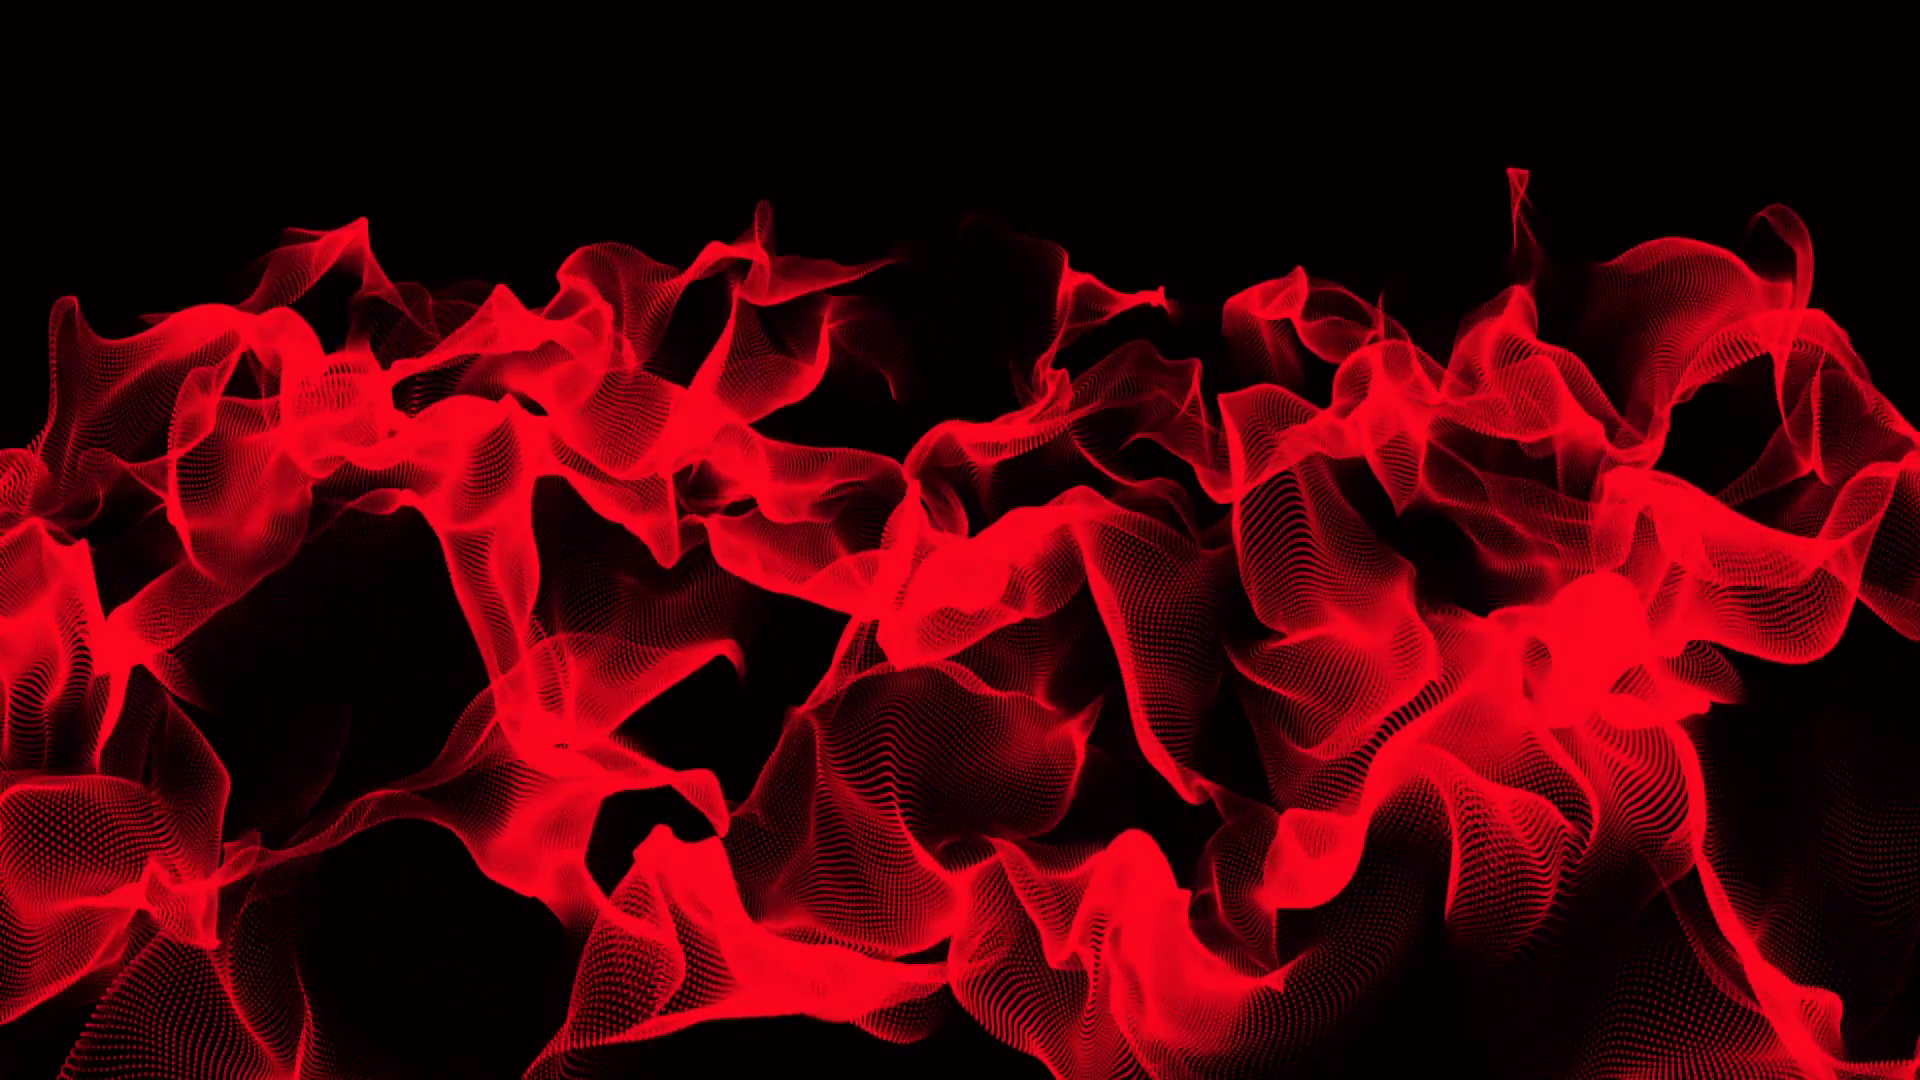 Abstract Red Flames 2 Motion Background - Videoblocks